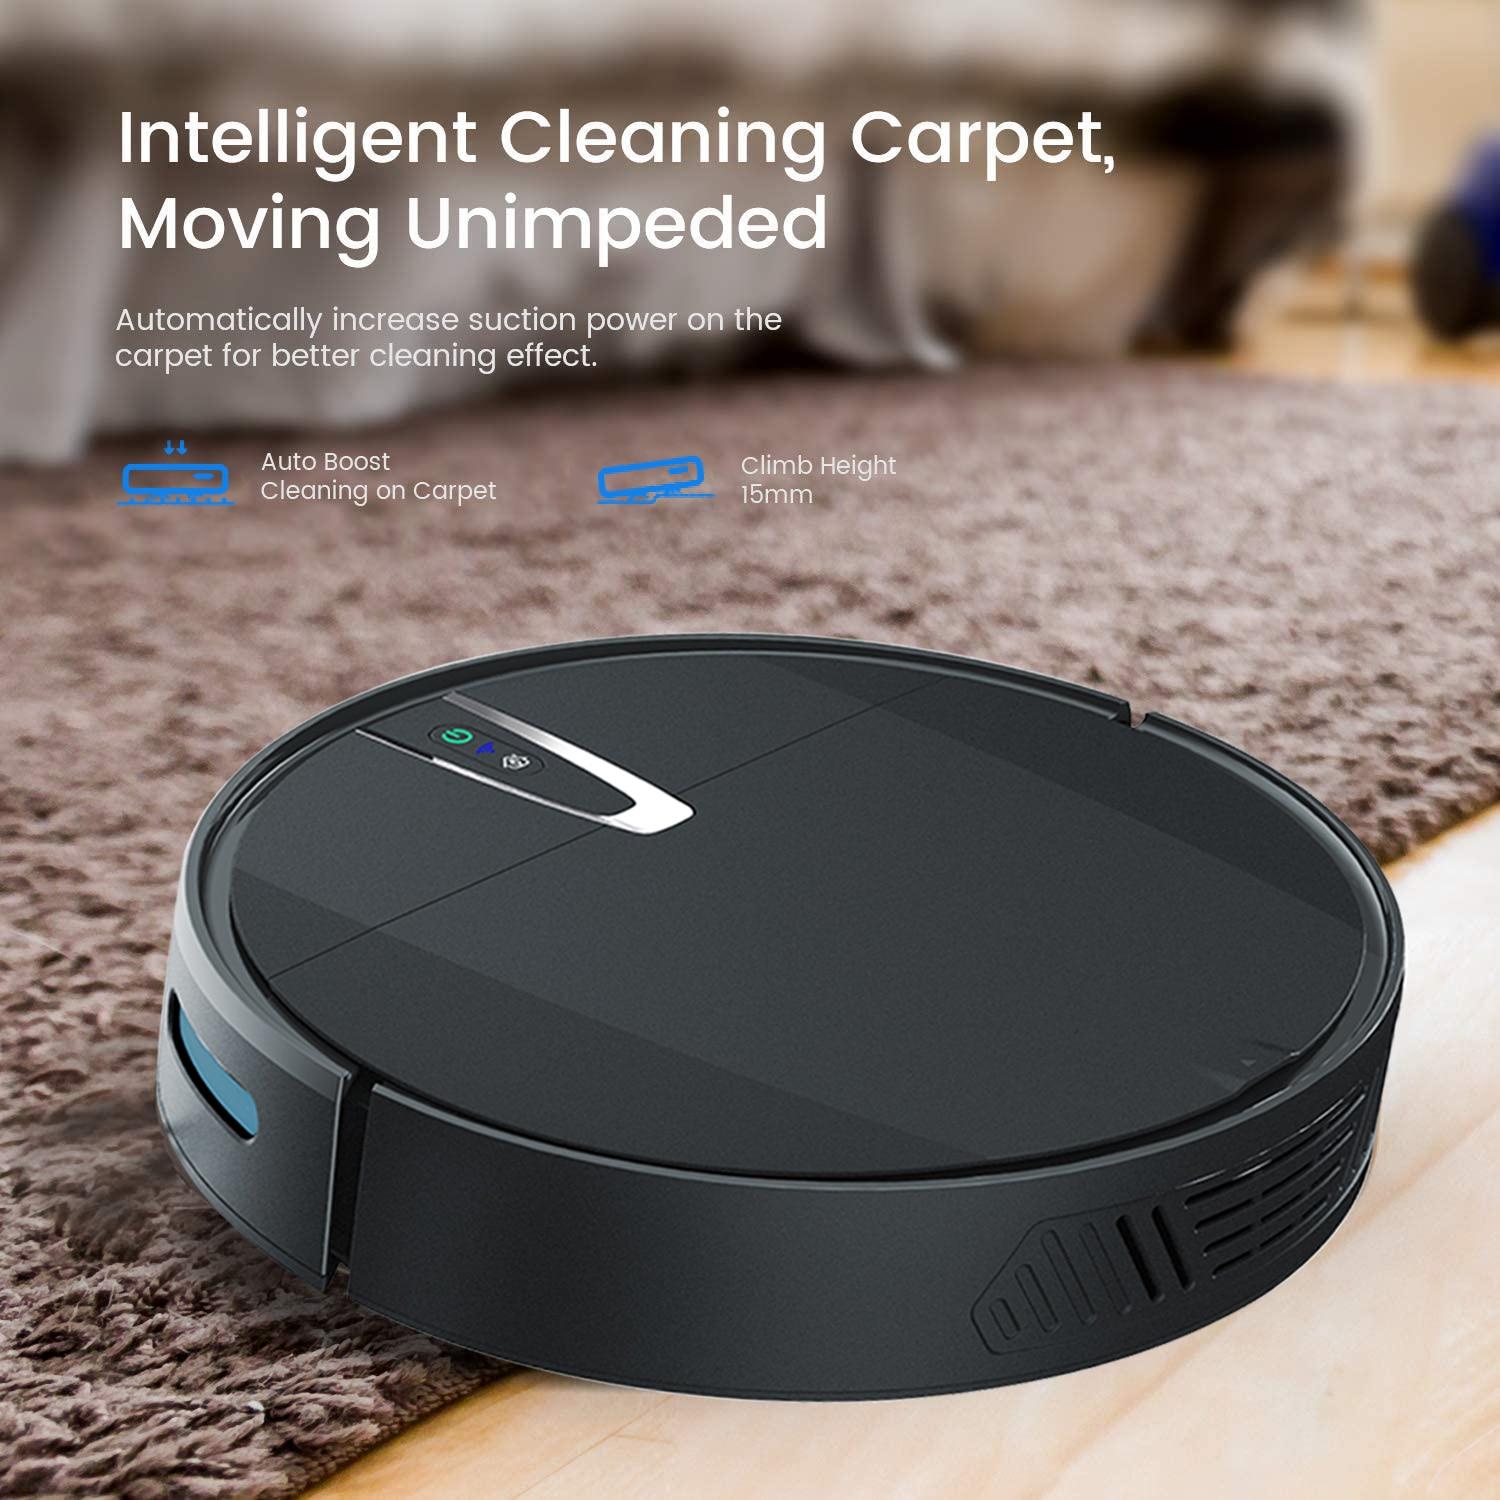 3200PA Vacuum Cleaner Robot Smart Wireless Remote Control Auto Sweeping Machine Planned Floor Cleaning Vacuum Cleaner For Home